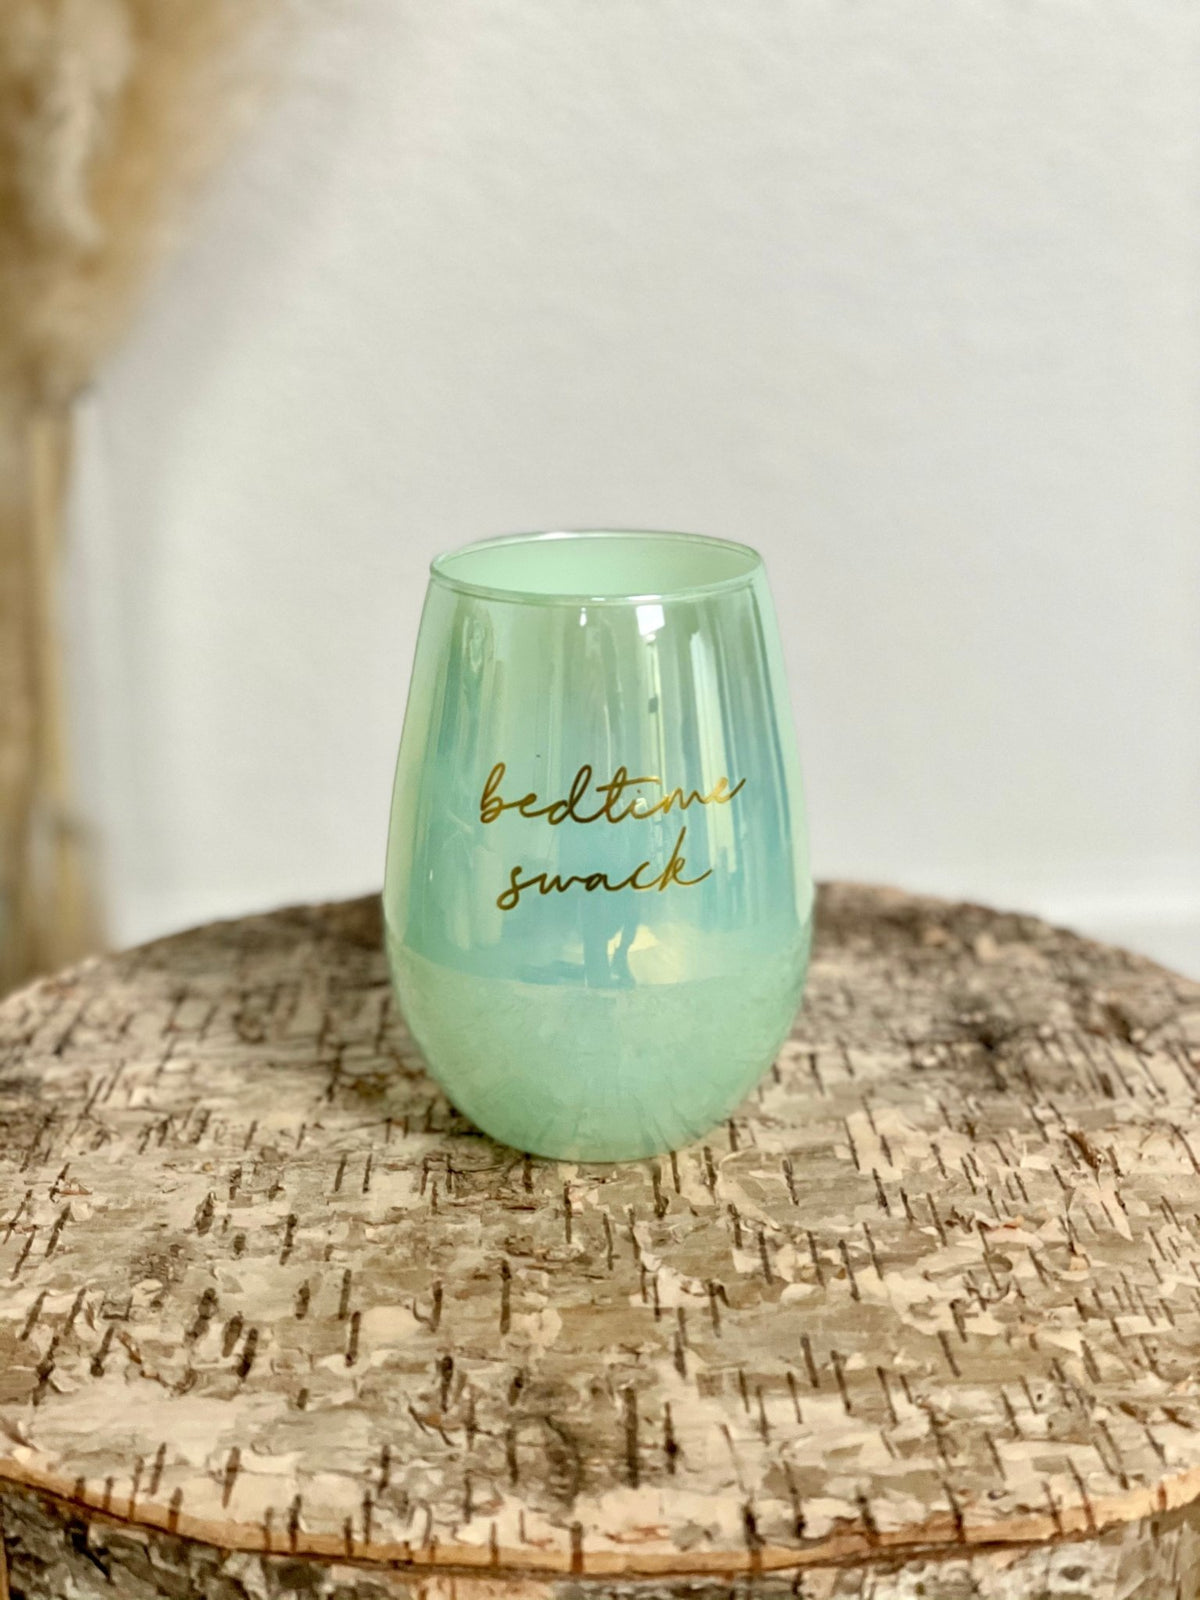 Bedtime snack wine glass - Trendy Tumblers, Mugs and Cups at Lush Fashion Lounge Boutique in Oklahoma City